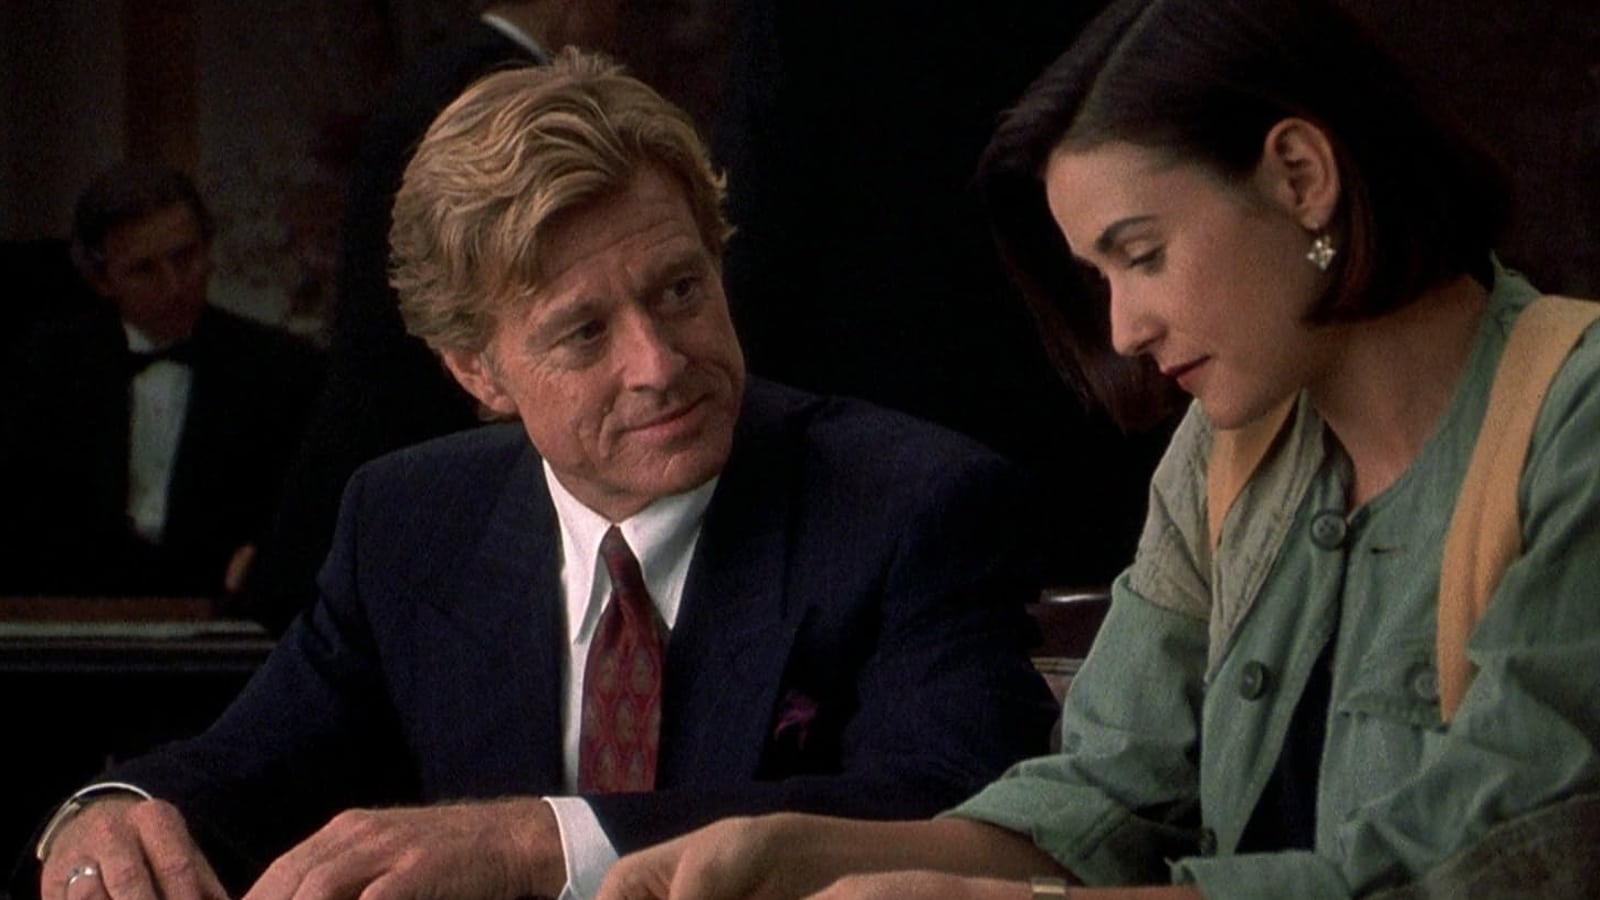 <p>It may have been one of the biggest hits of its year, but <em>Indecent Proposal</em> scandalized filmgoers of the early 90s. Provocative director Adrian Lyne casts Redford as a devilish millionaire who tempts a struggling couple, played by Demi Moore and Woody Harrelson, with an offer they cannot refuse. Screenwriter Amy Holden Jones keeps the sympathy clearly with the couple and against the rich man, but Redford’s natural appeal makes it hard to completely hate him.</p>